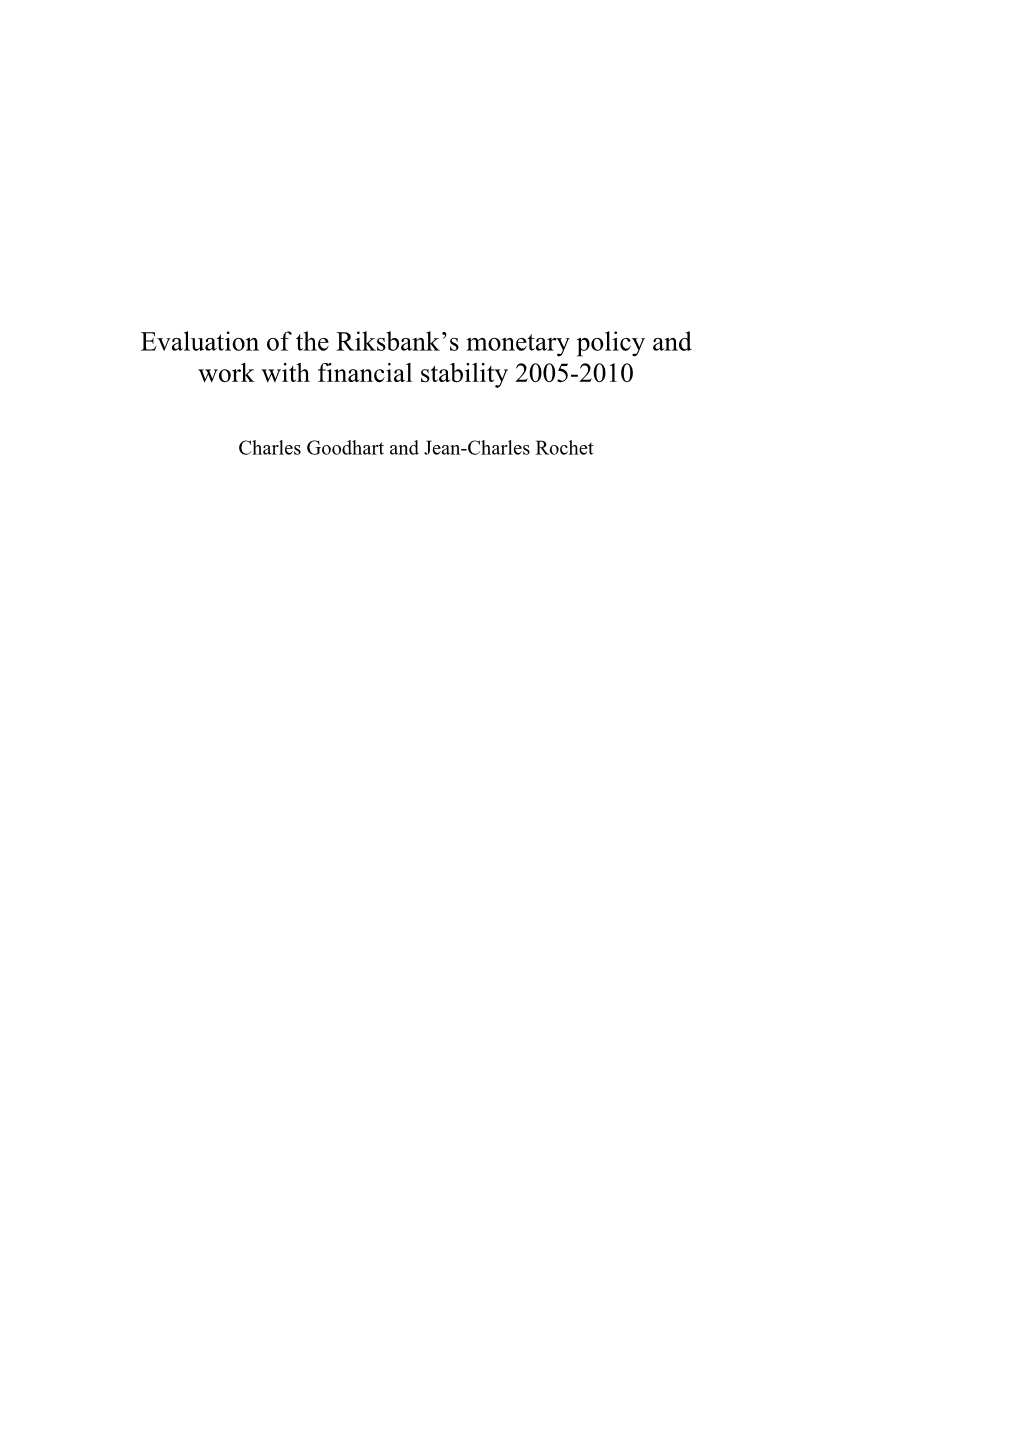 Evaluation of the Riksbank's Monetary Policy and Work with Financial Stability 2005-2010